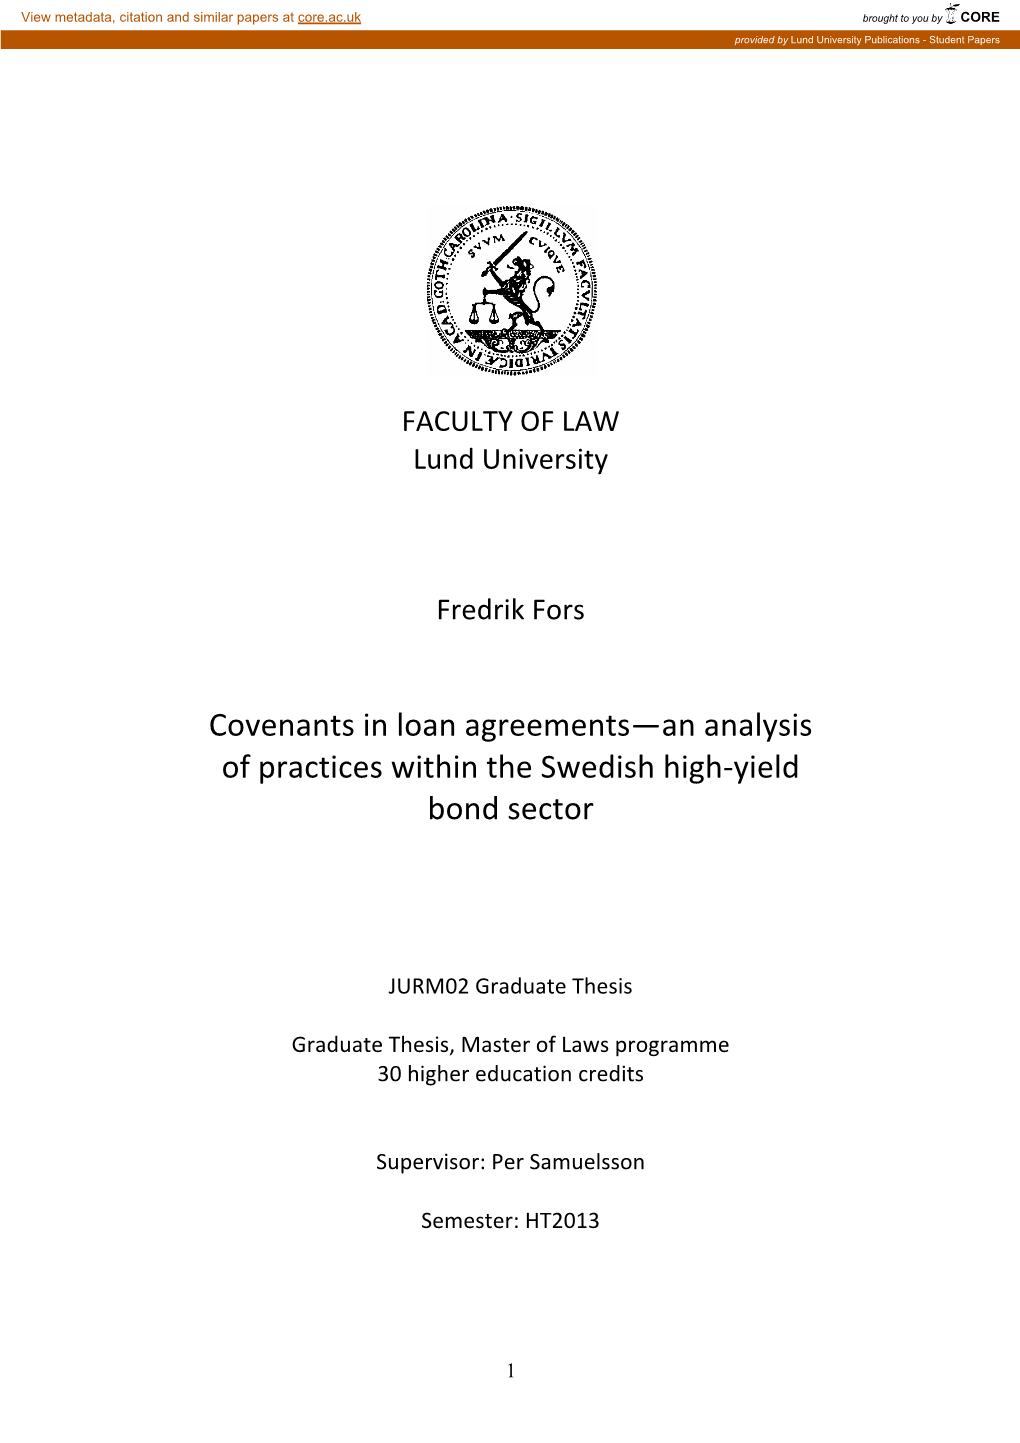 Covenants in Loan Agreements—An Analysis of Practices Within the Swedish High-Yield Bond Sector